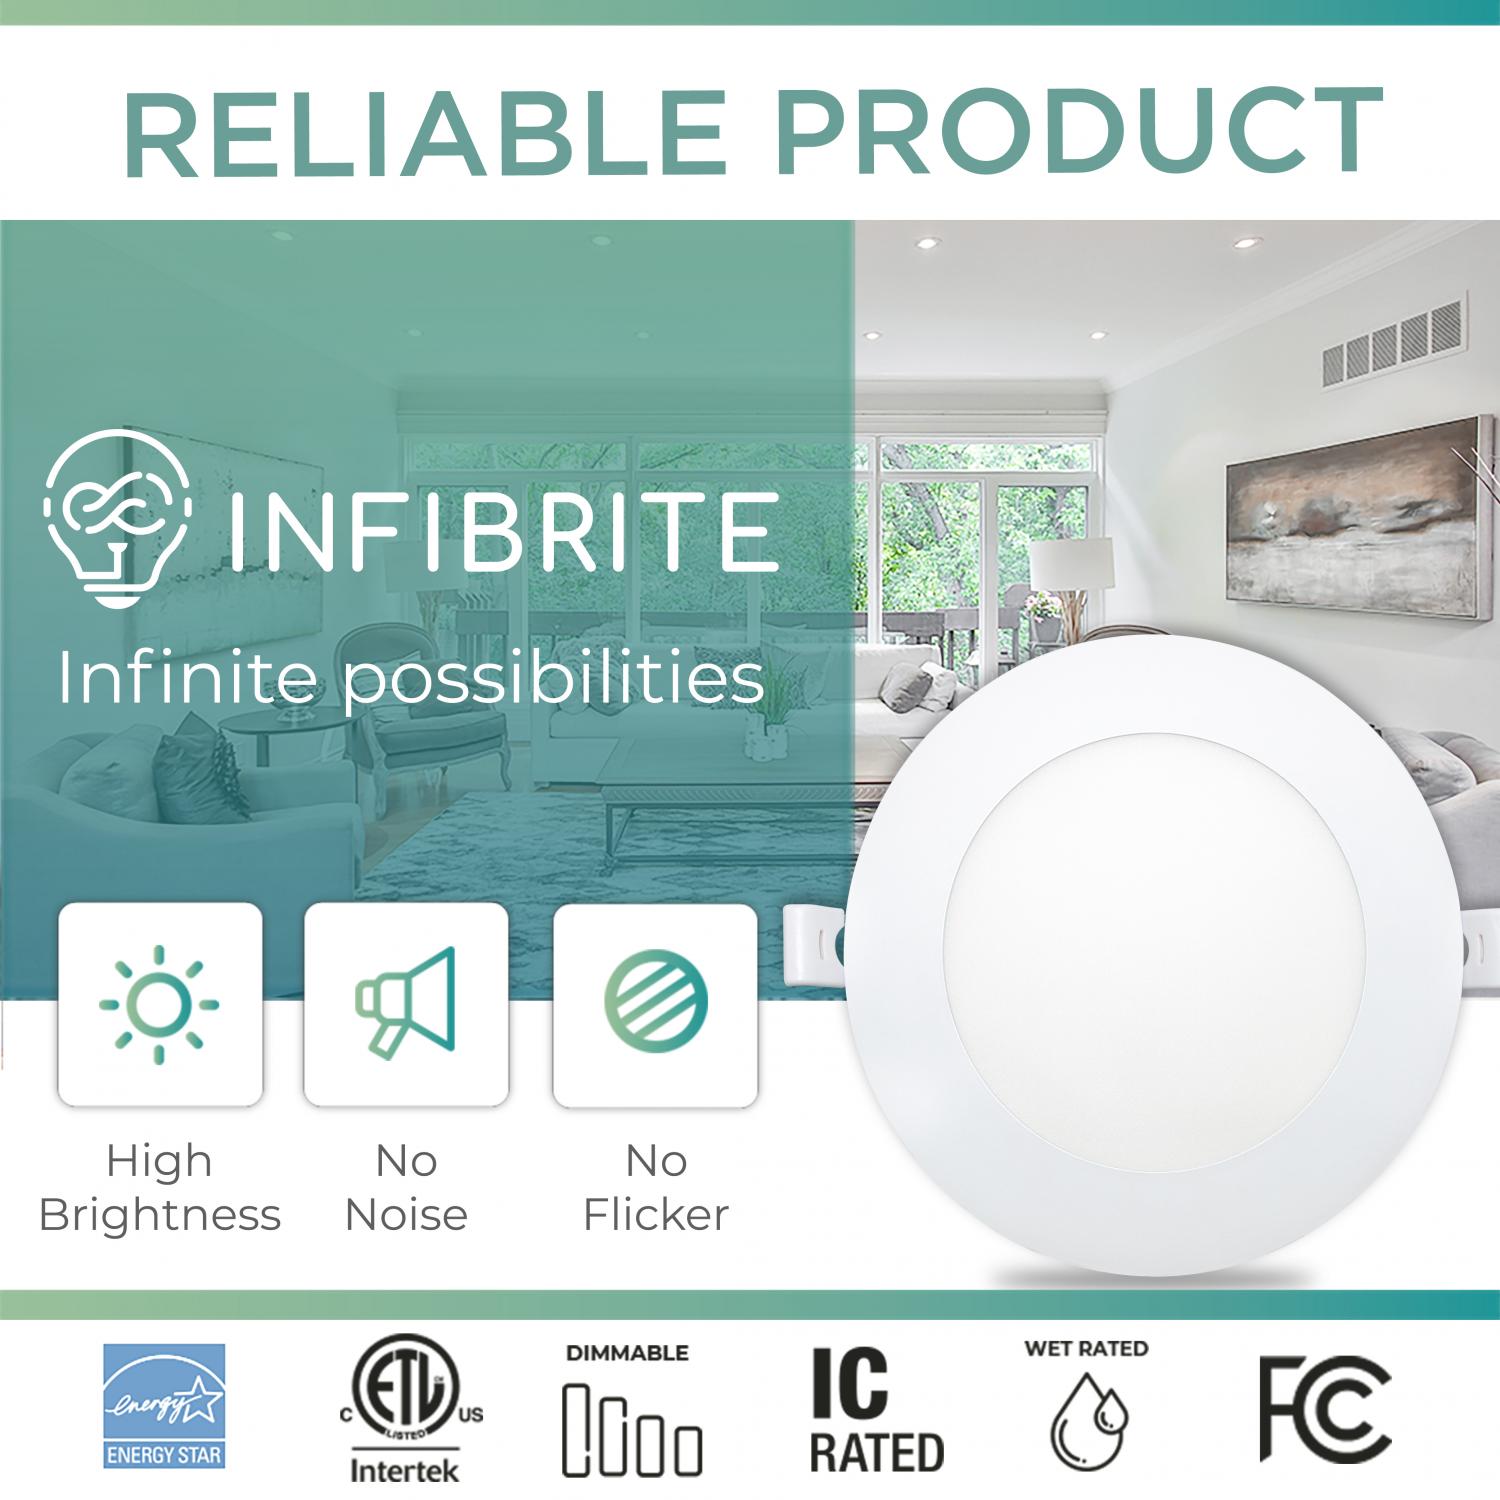 Infibrite 4 Inch 3000K/4000K/5000K Selectable 9W 750 LM Ultra-Slim LED Ceiling Light with Junction Box, Flush Mount, Dimmable, Fixture for Bedroom, Wet Rated for Bathroom, Easy Install, 75W Eqv, ETL & Energy Star, US Company (12 Pack)